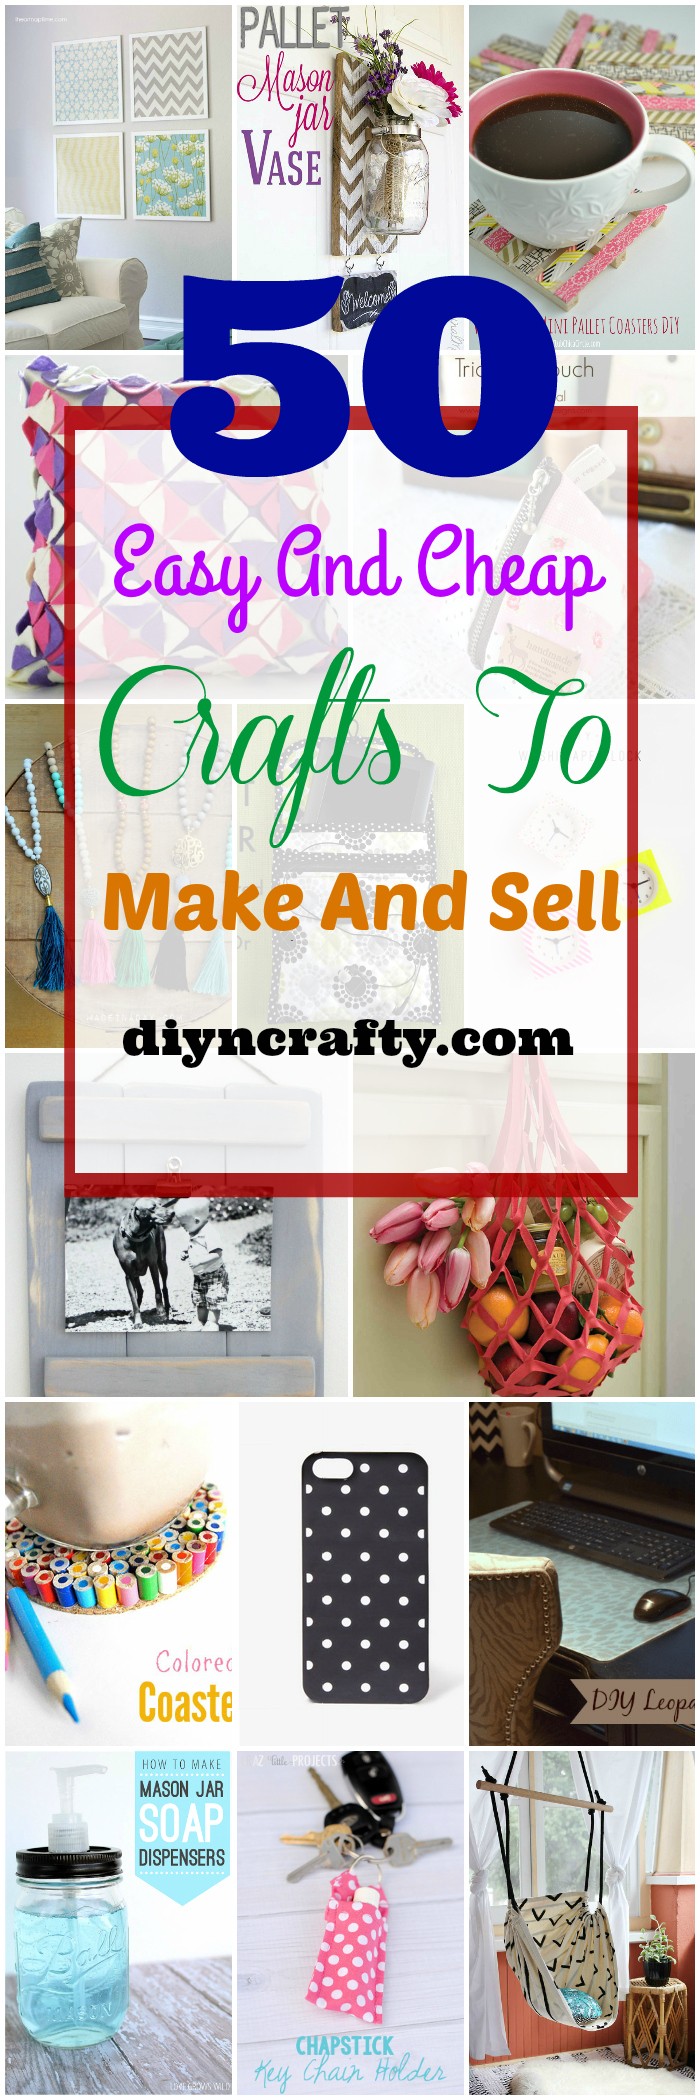 50 Easy And Cheap Crafts To Make And Sell - easy crafts 